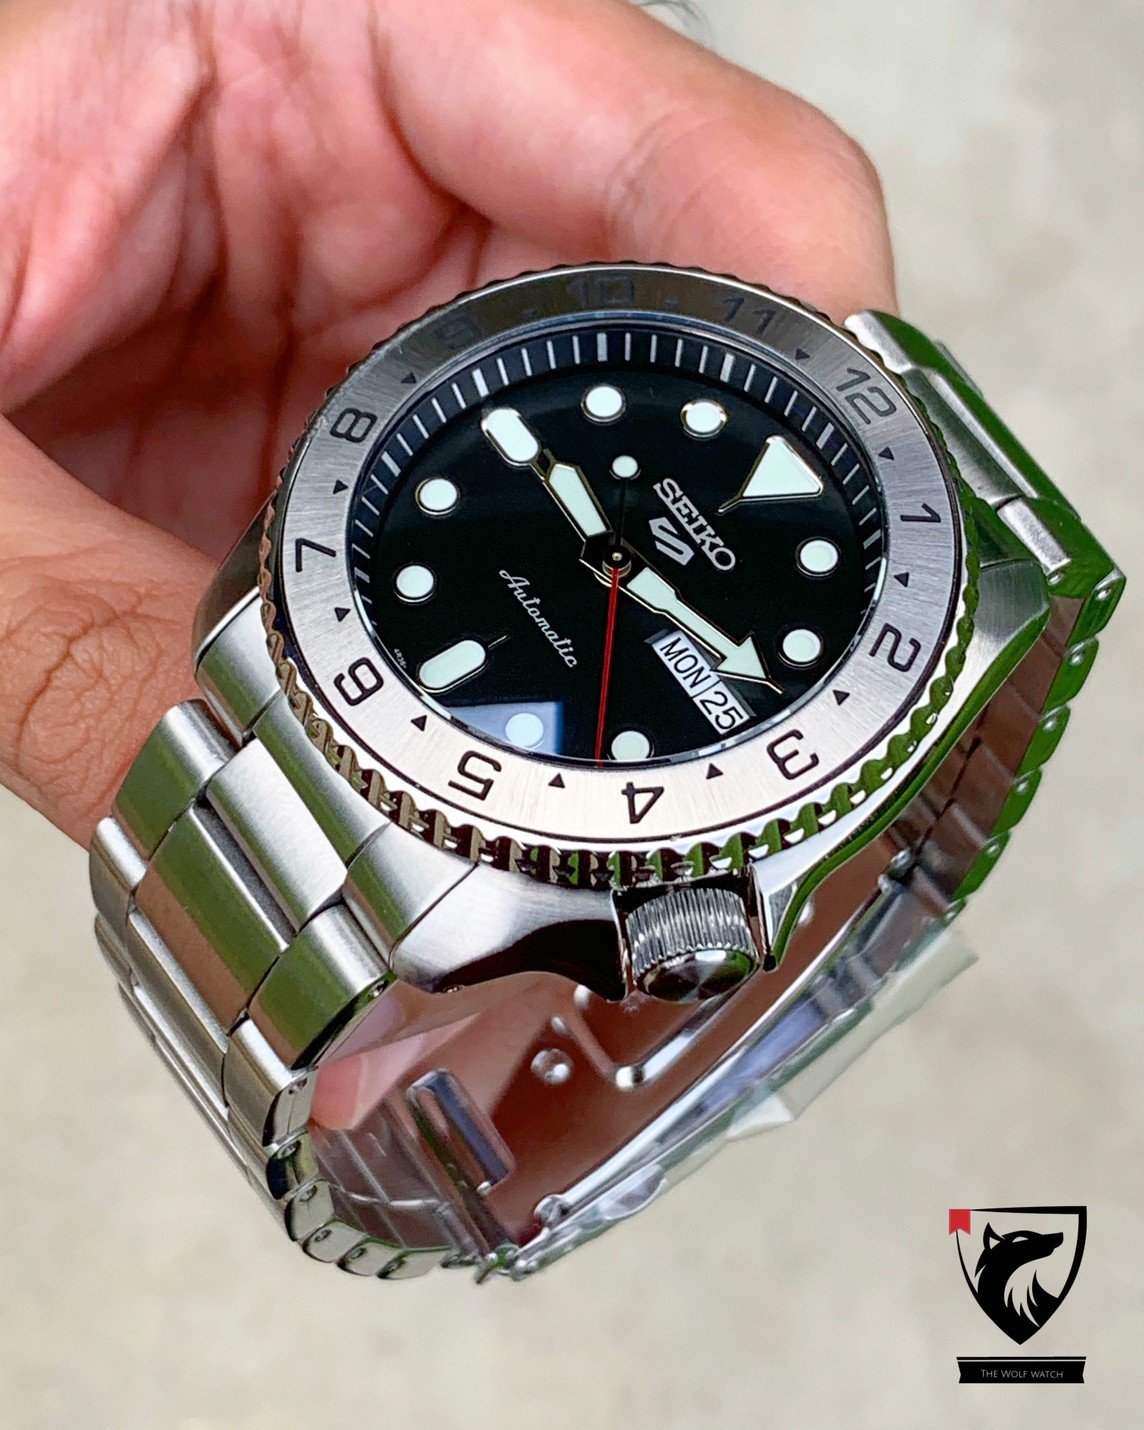 THE EXPLORER II RED LINE EDITION